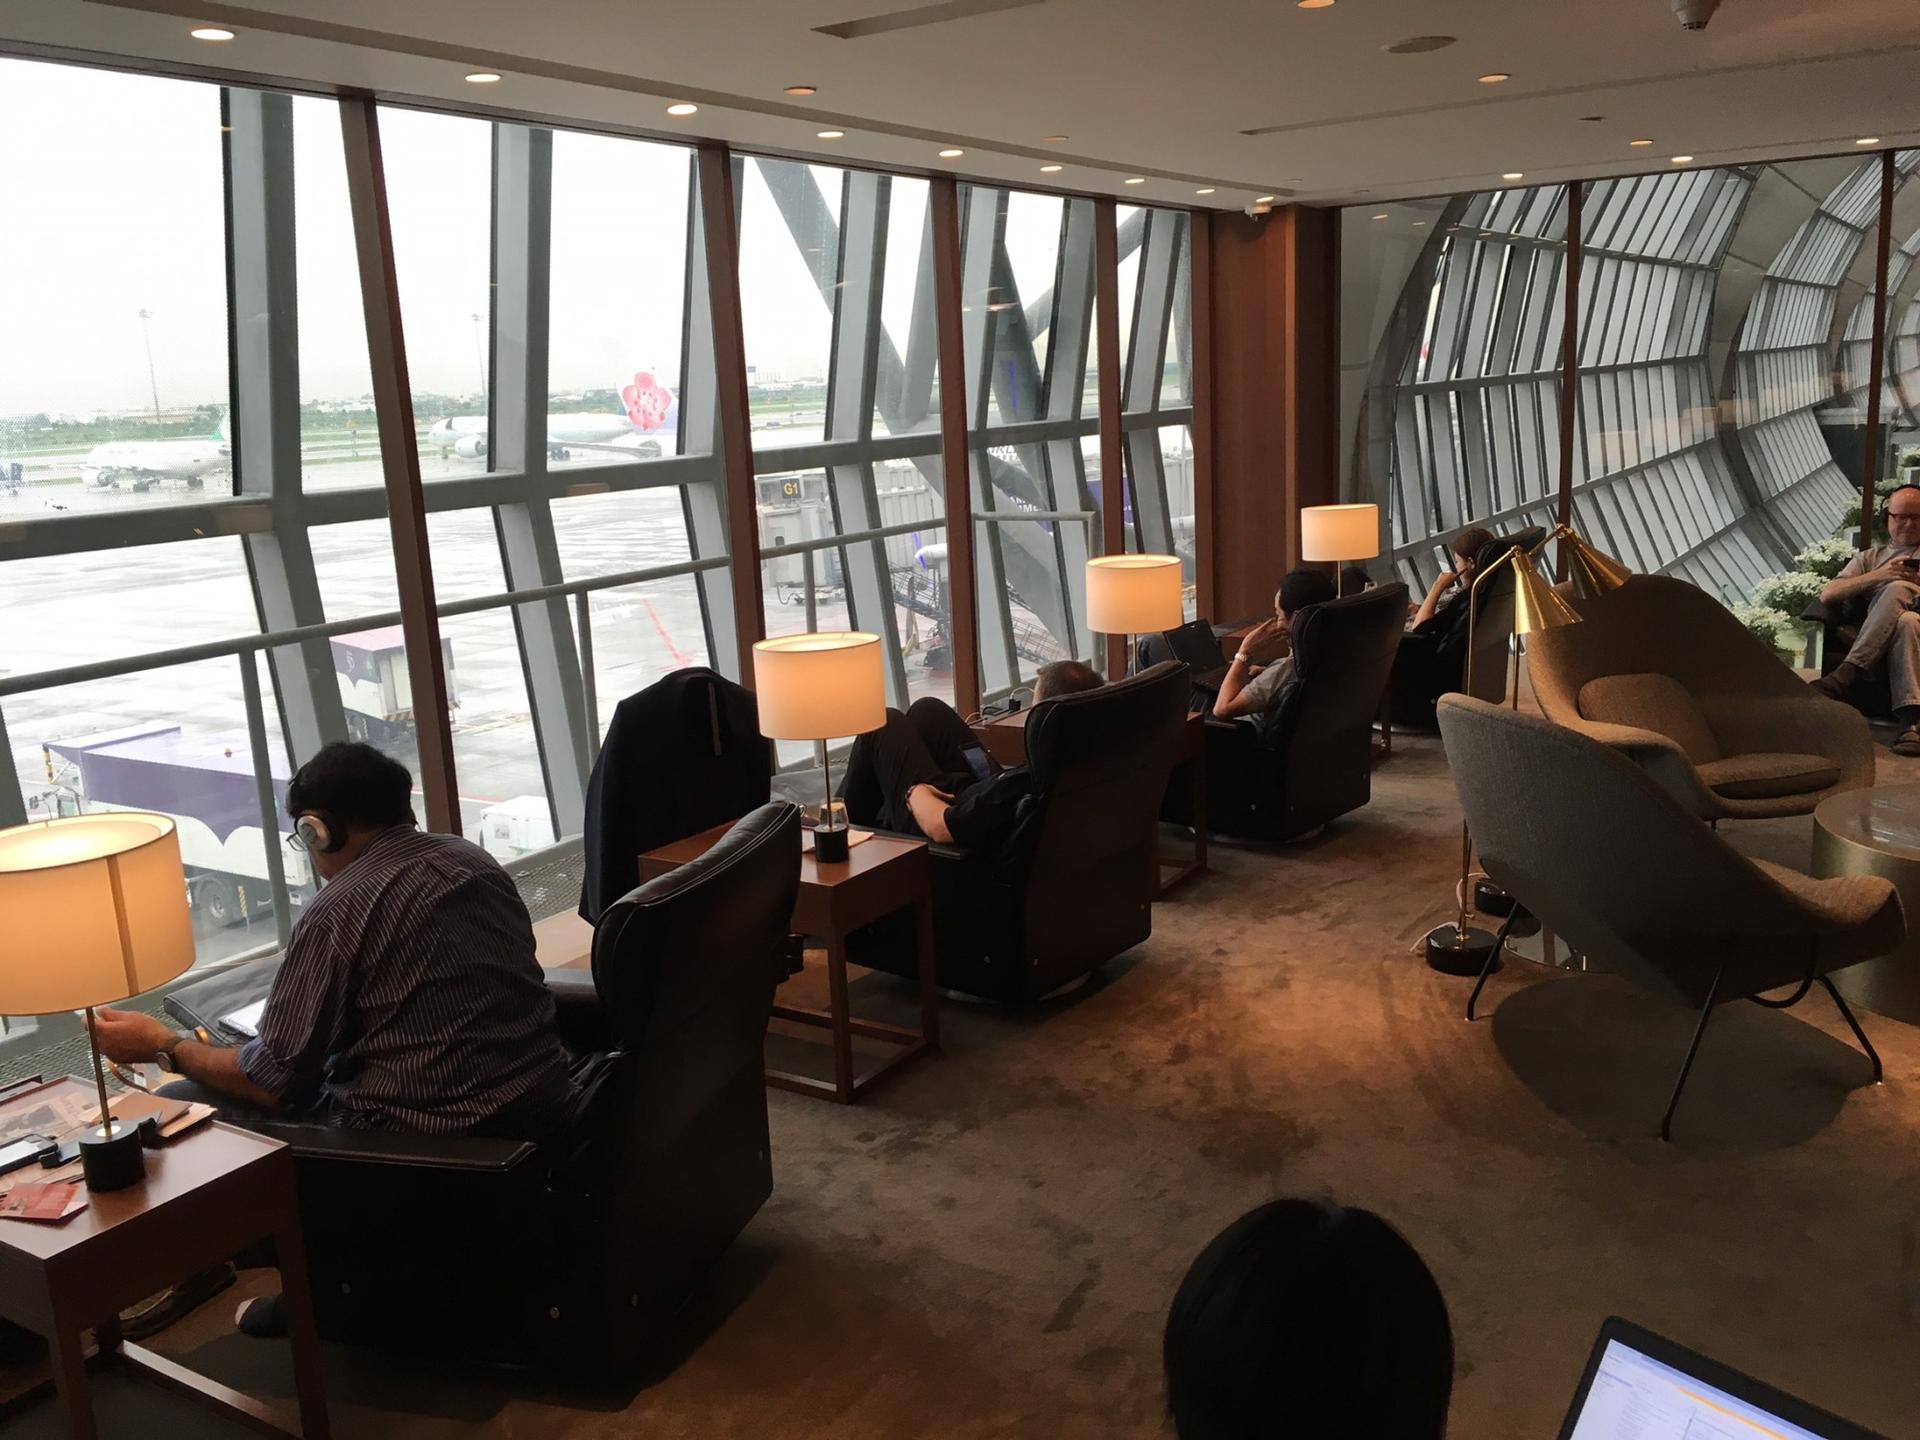 Cathay Pacific First and Business Class Lounge image 59 of 69